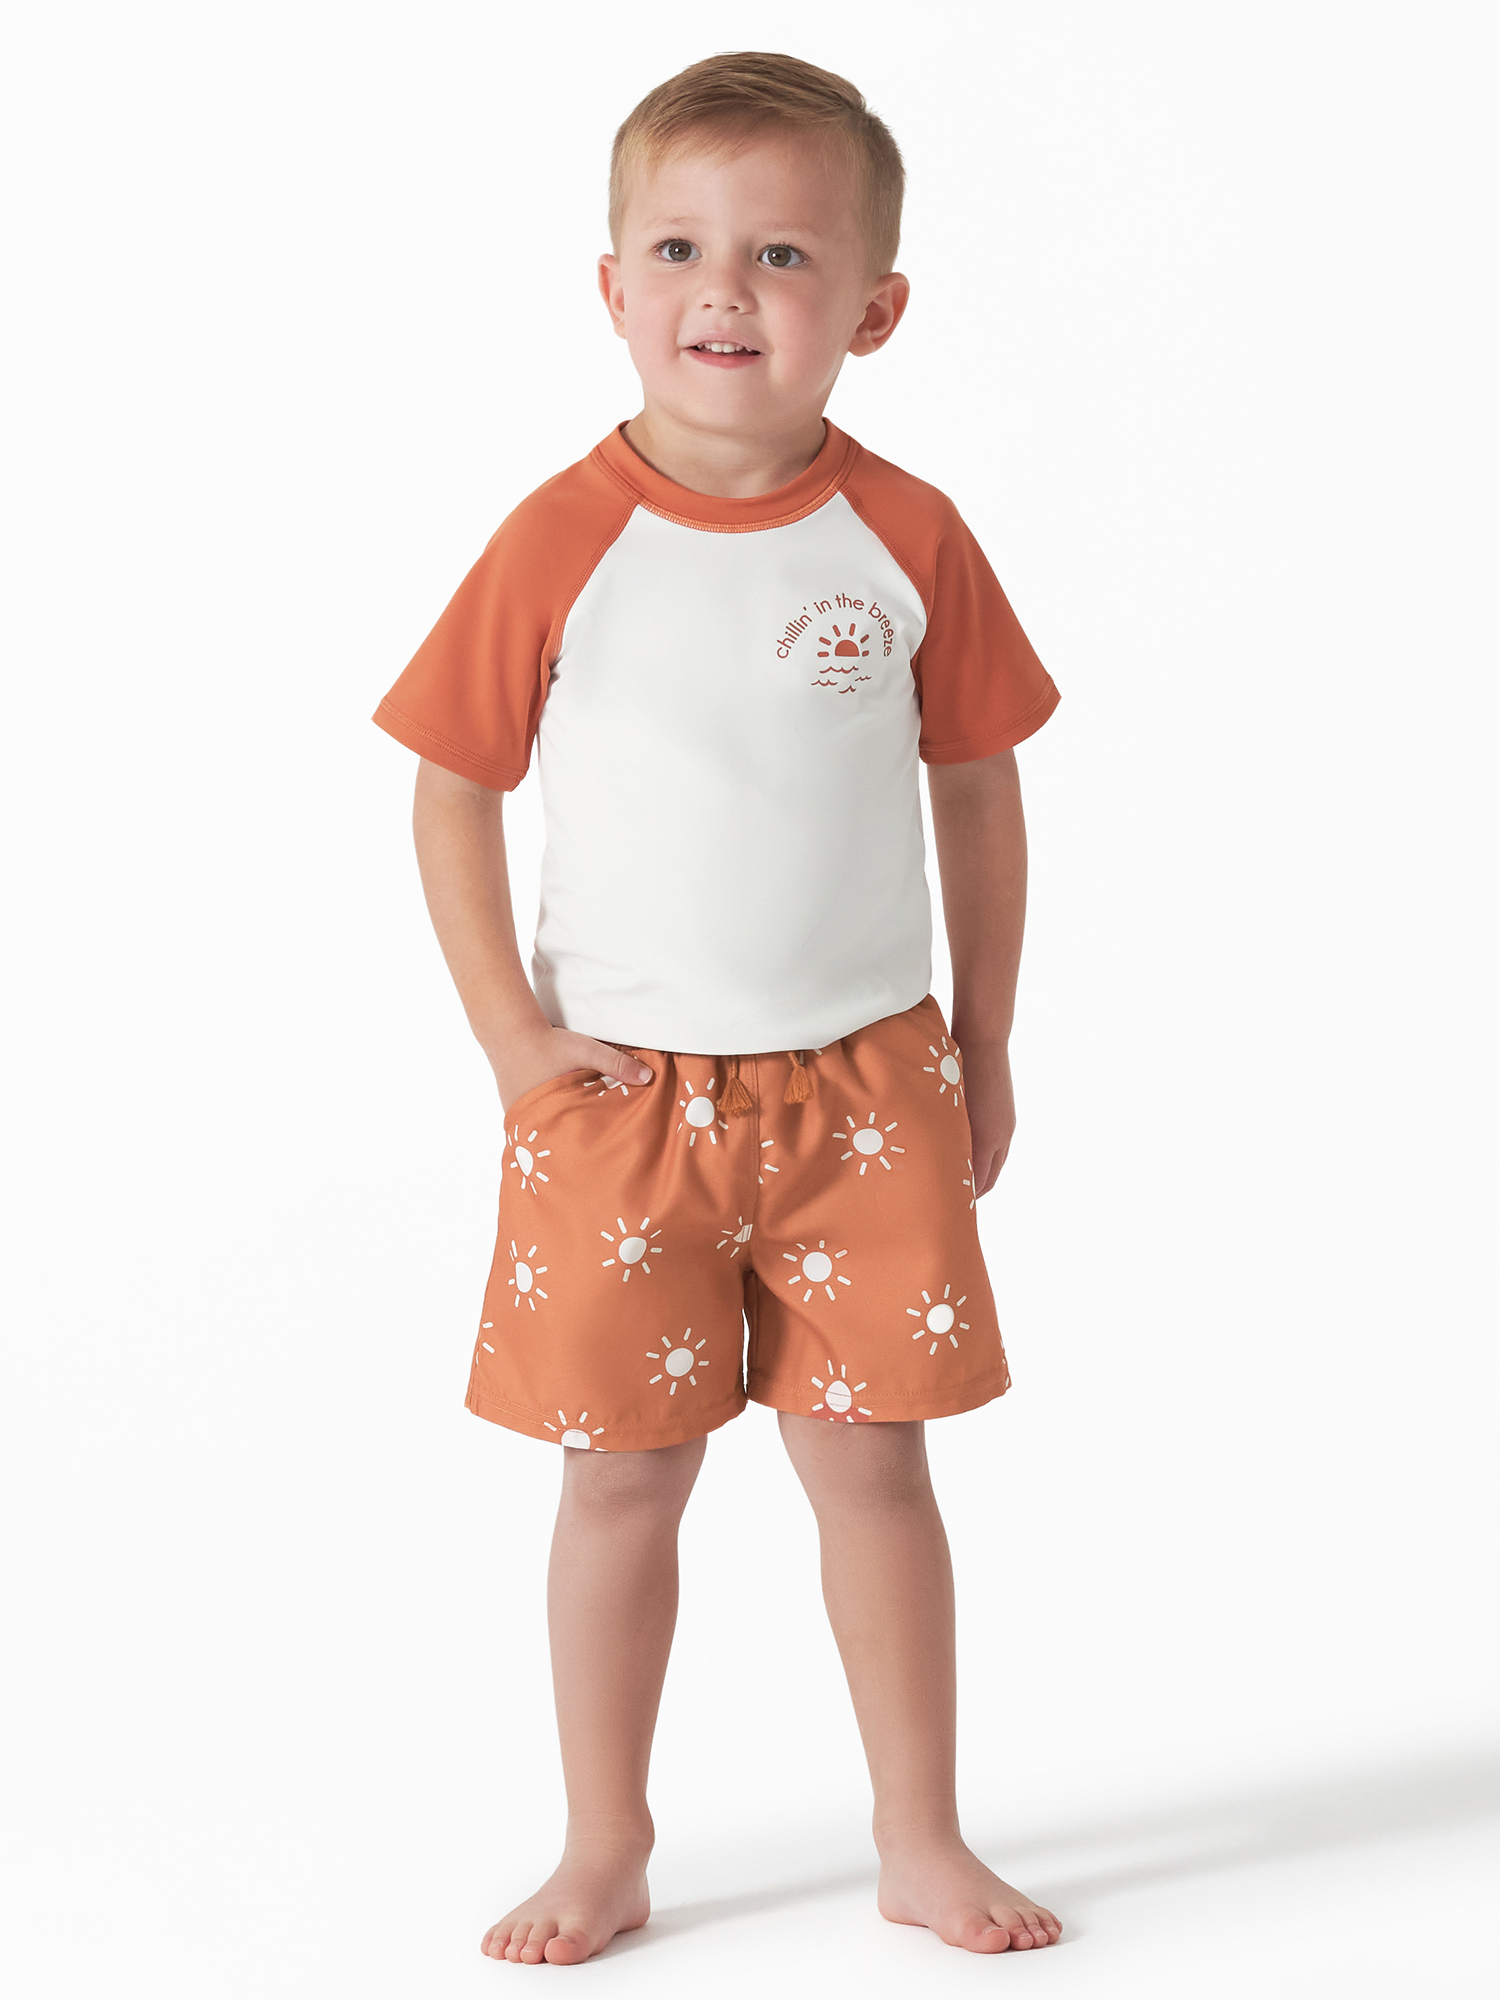 Modern Moments By Gerber Baby and Toddler Boy Rashguard and Swim Trunks Set, 12M-5T - image 2 of 12